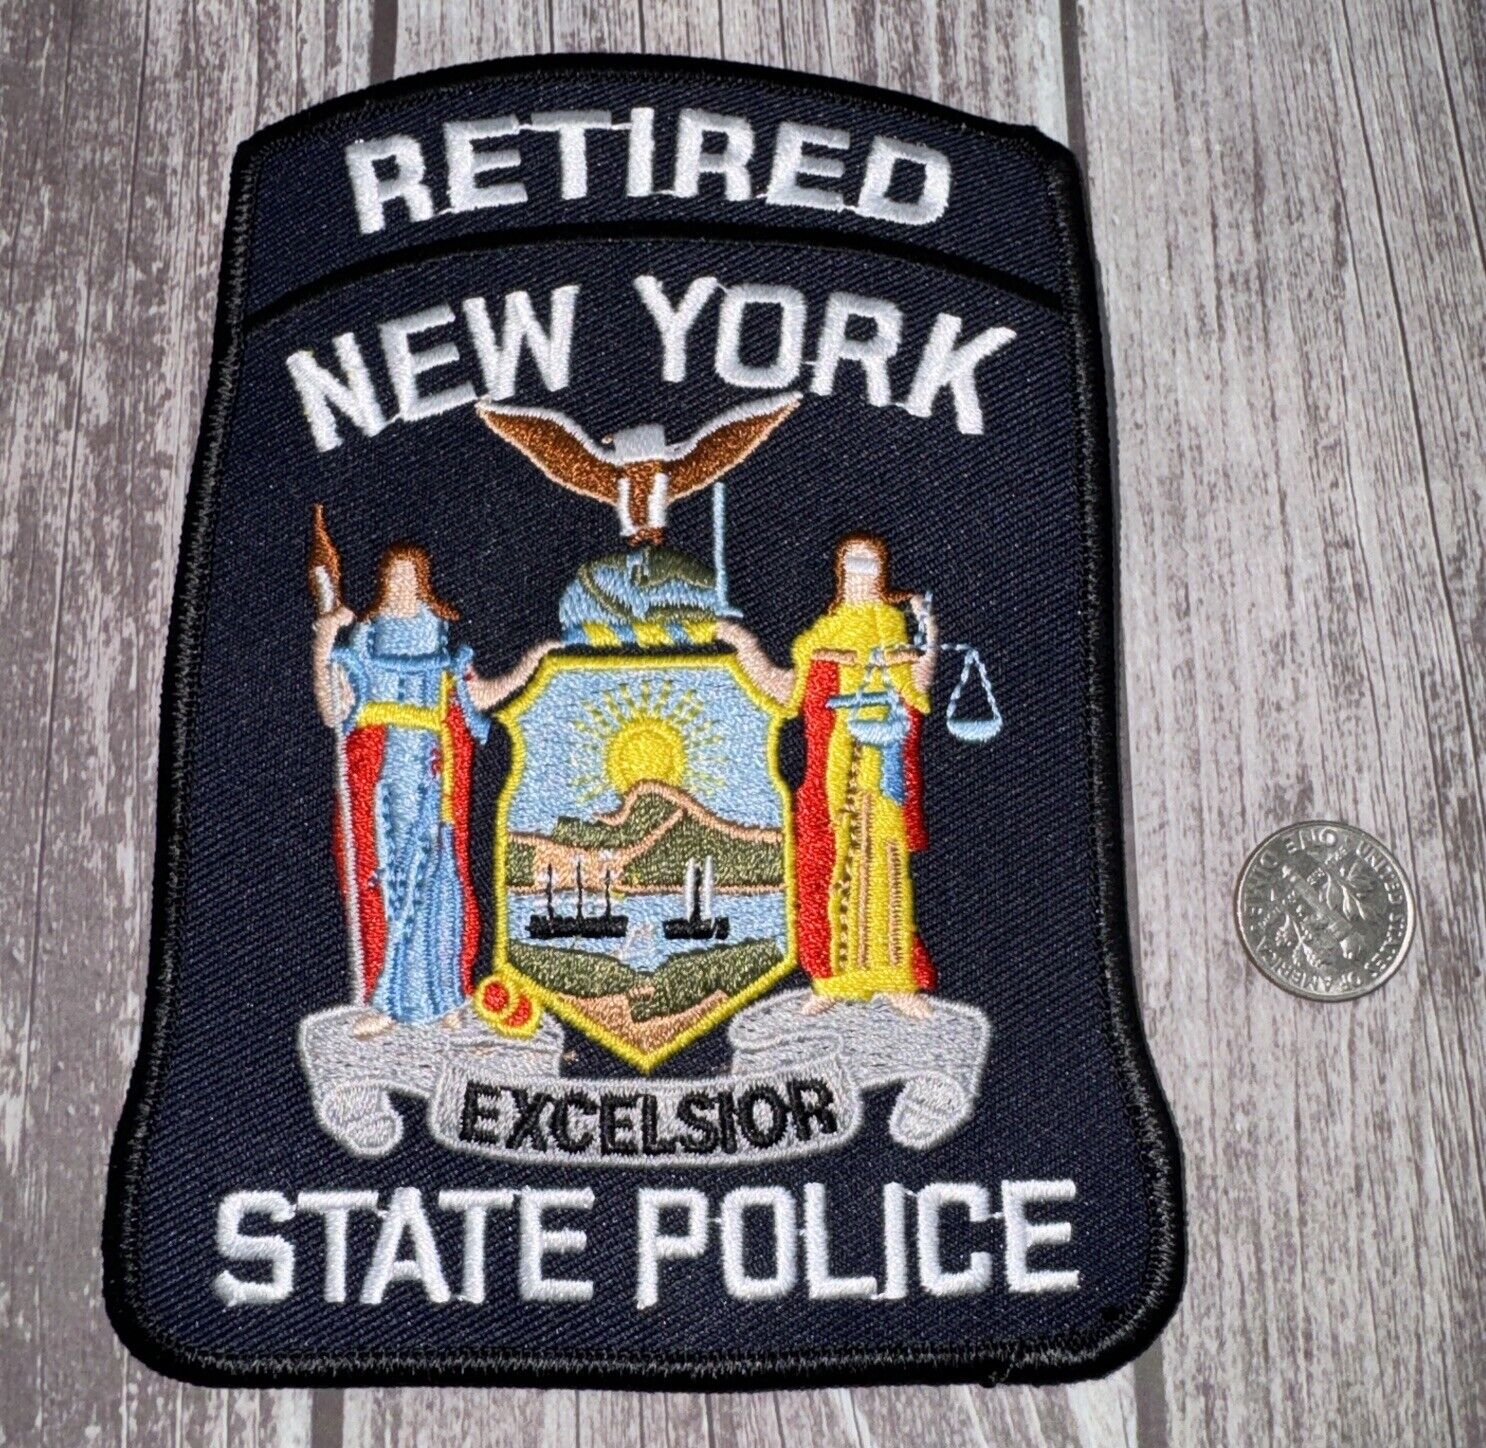 New York State Police Trooper RETIRED patch